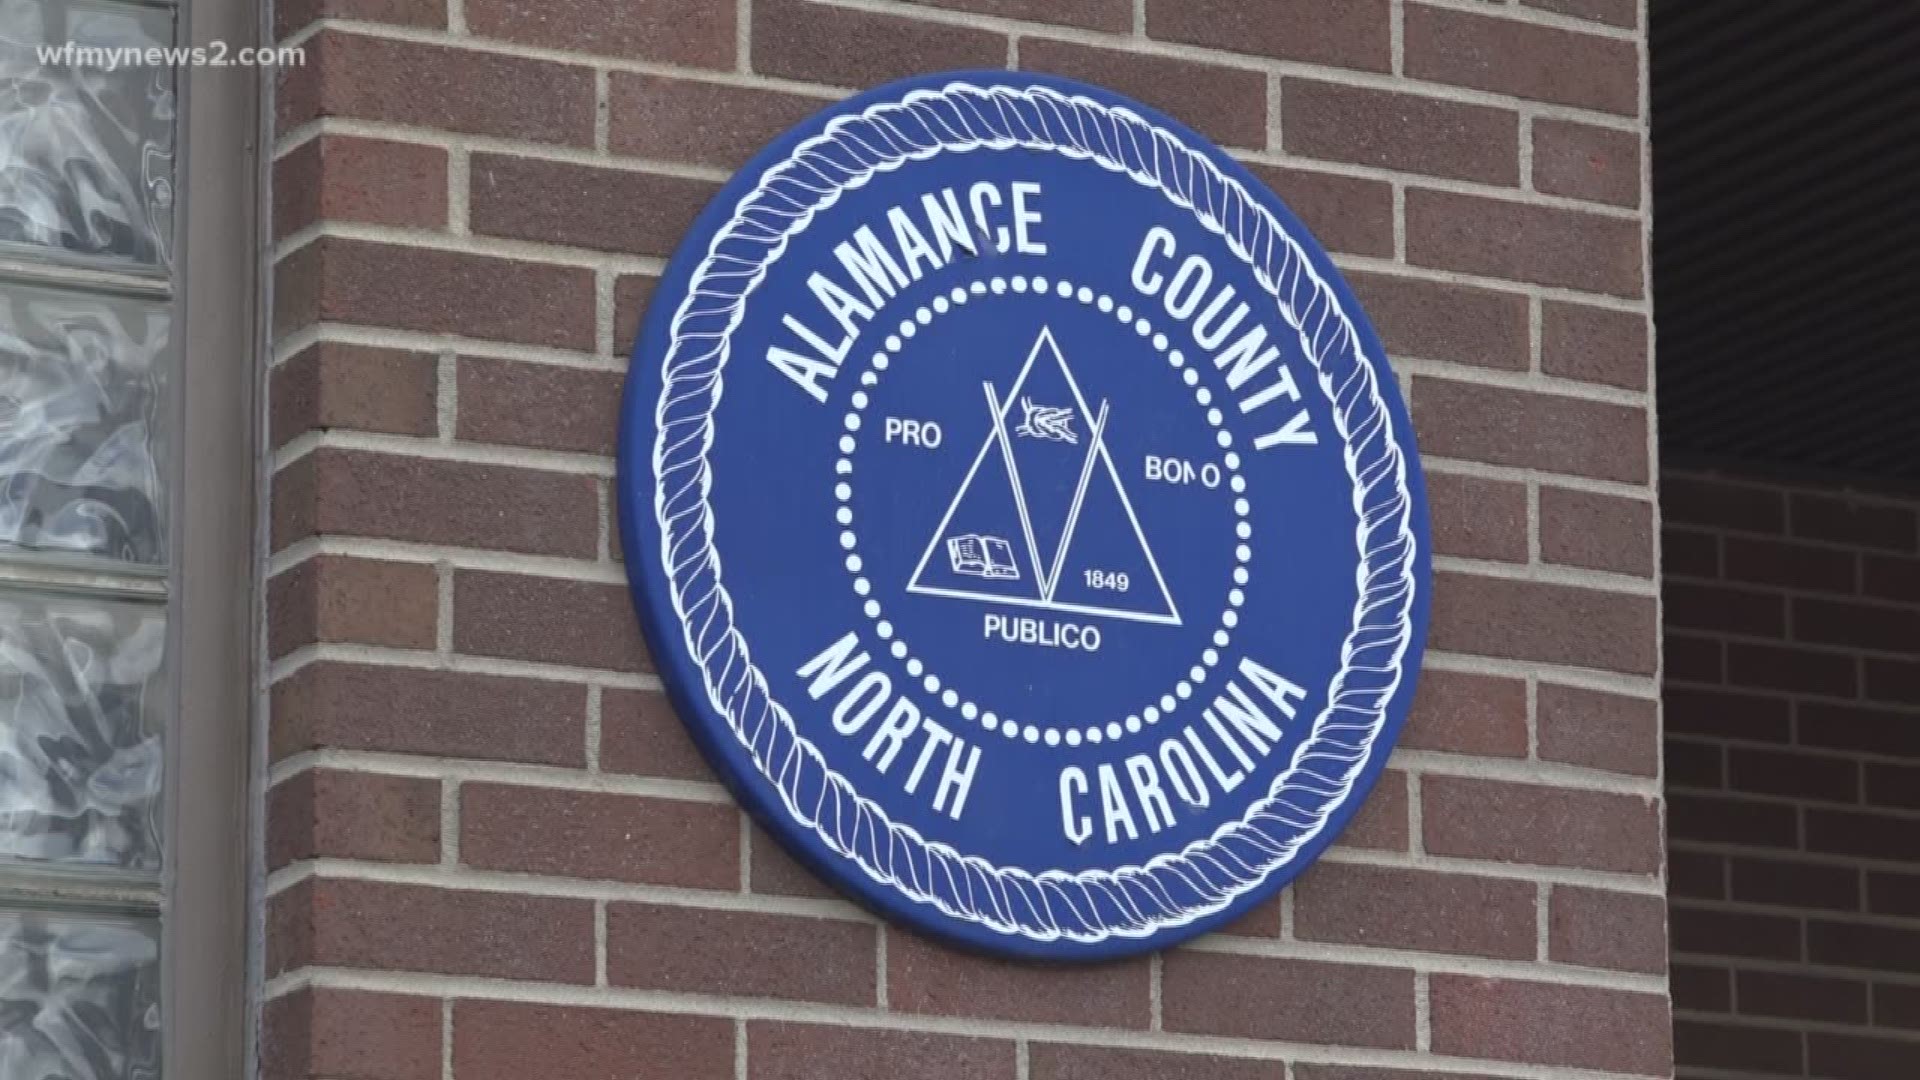 The money is flowing for several school improvement projects in Alamance County after people there voted in favor of millions dollars in school bonds.